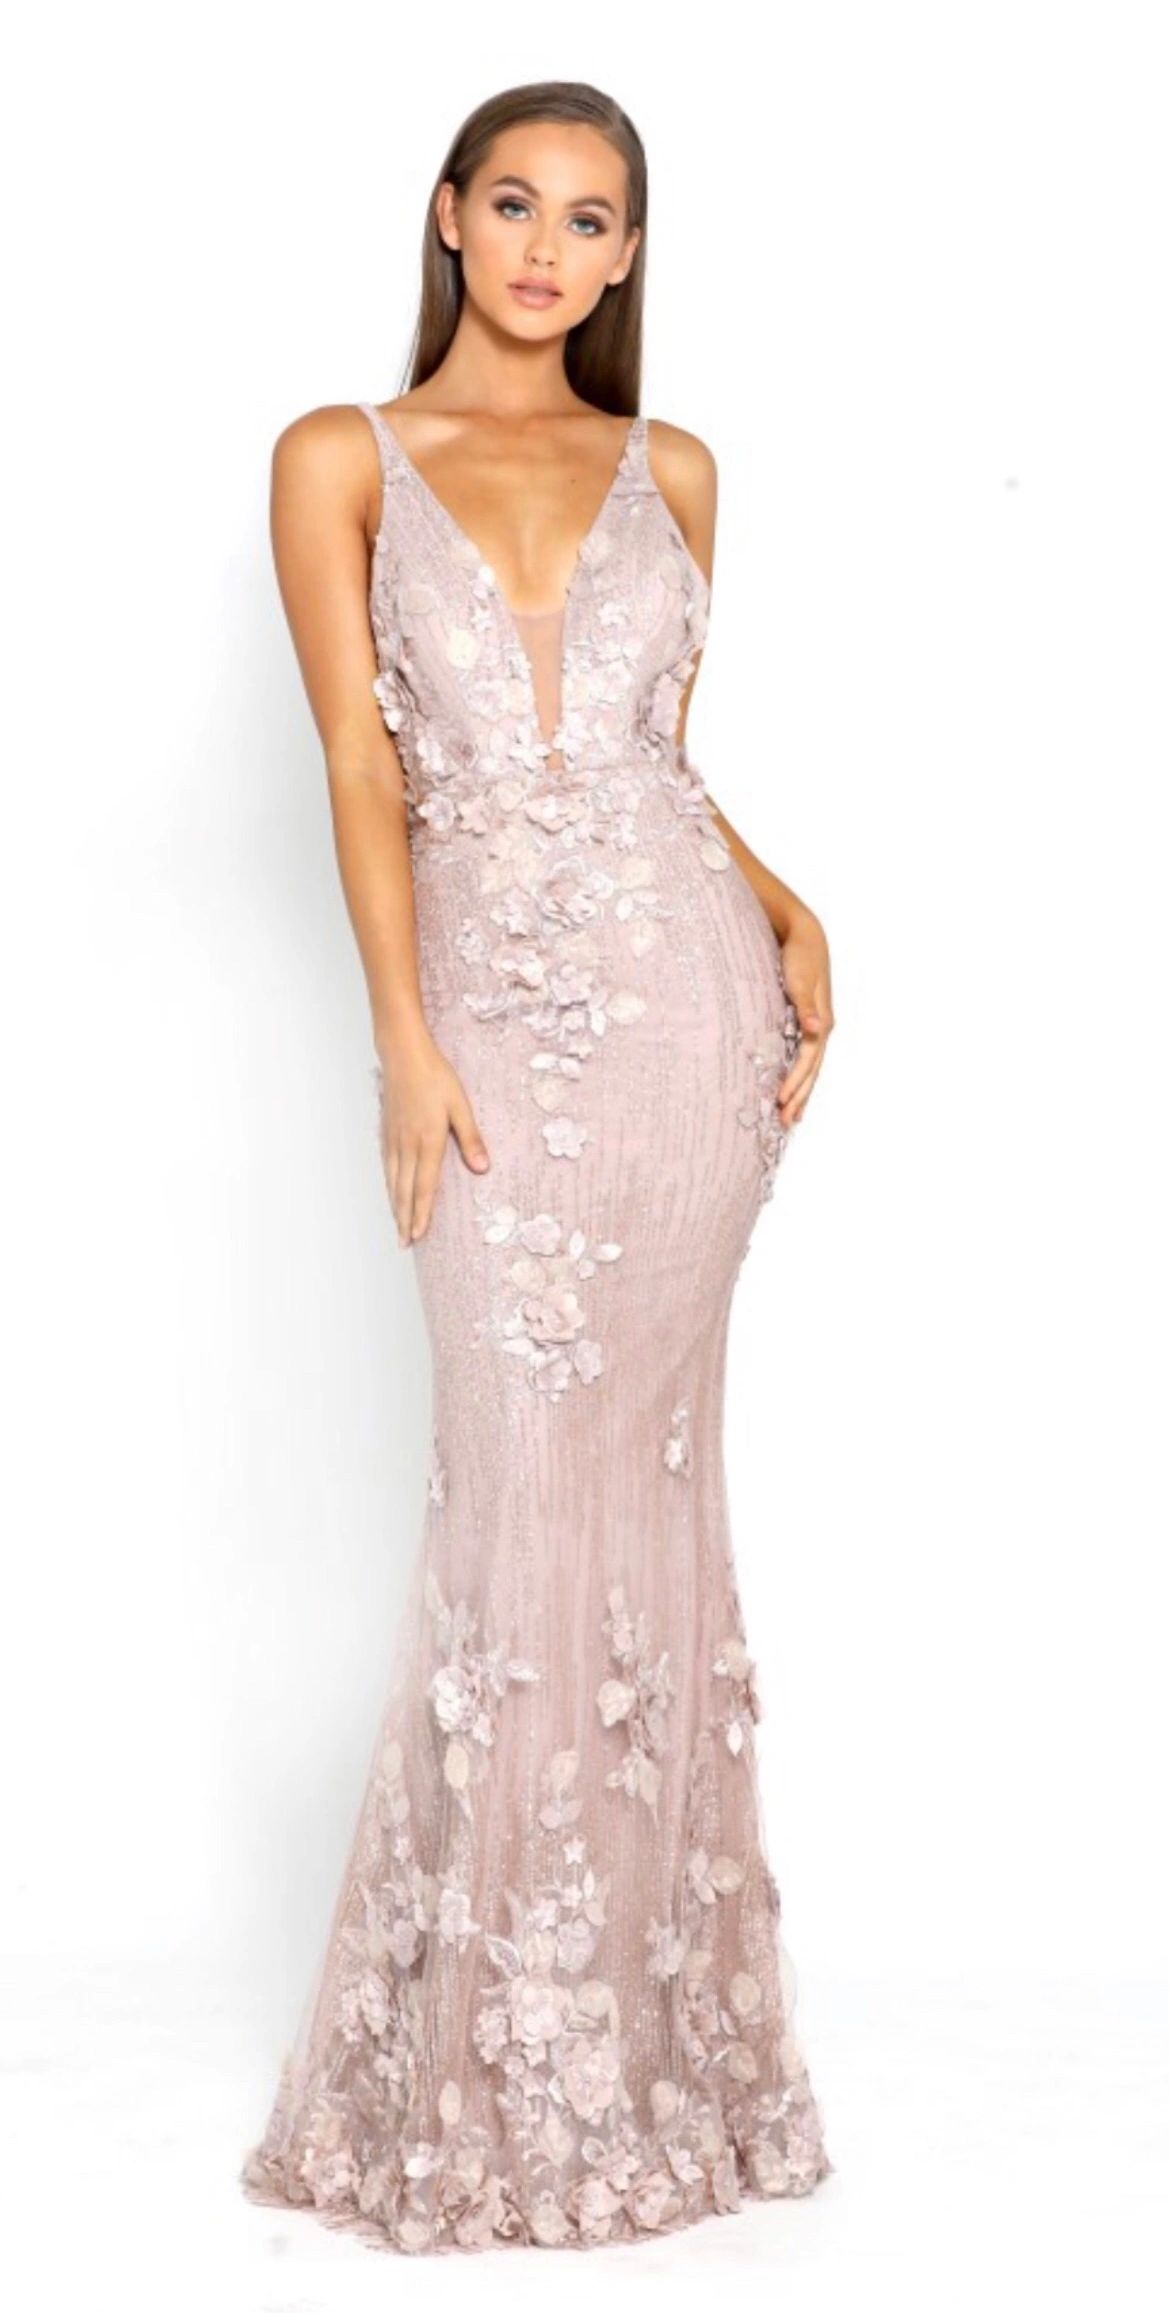 Gorgeous couture gowns for all your special events.